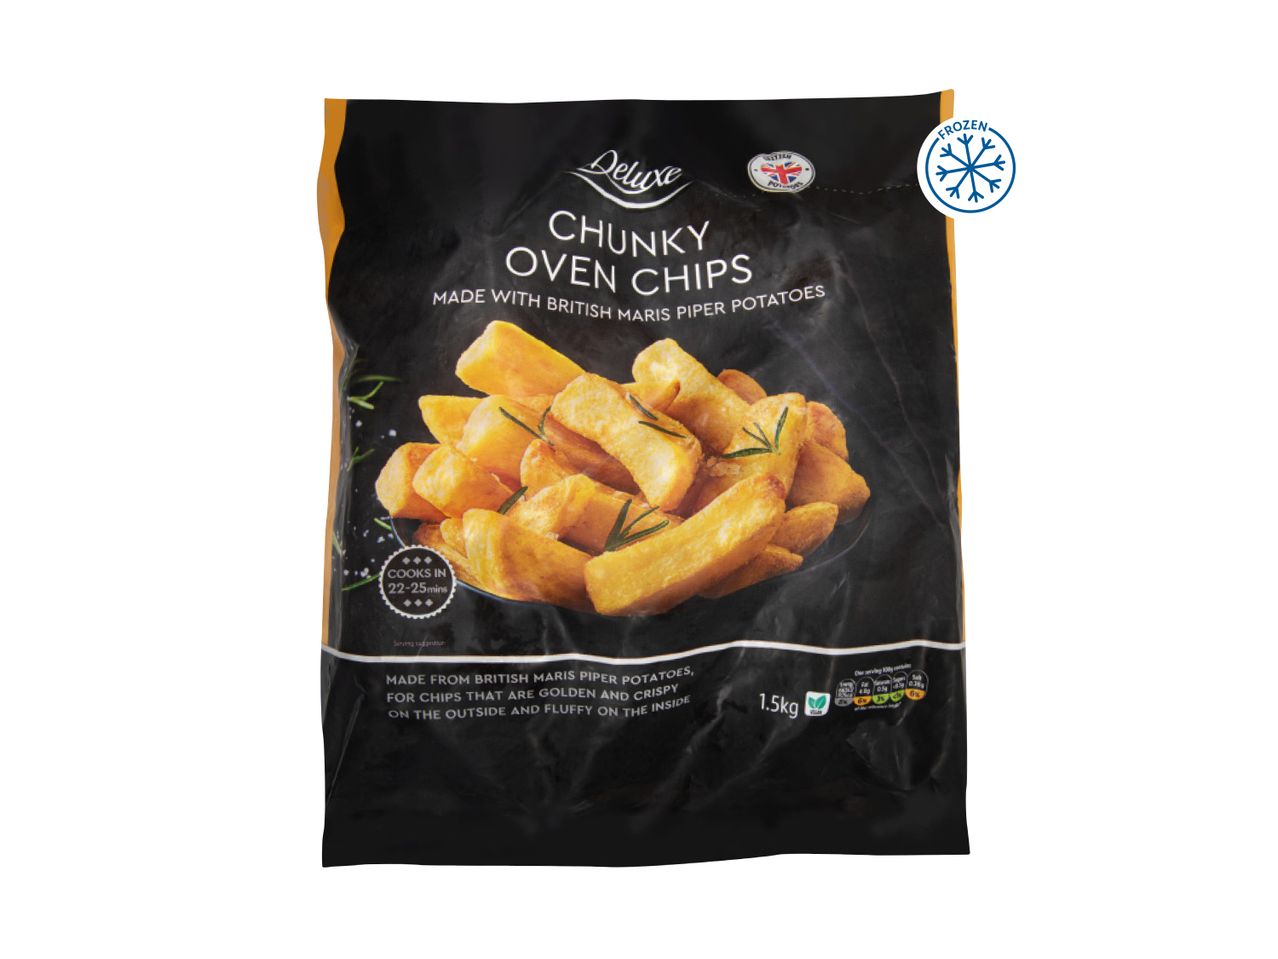 Go to full screen view: Deluxe Chunky Oven Chips - Image 1